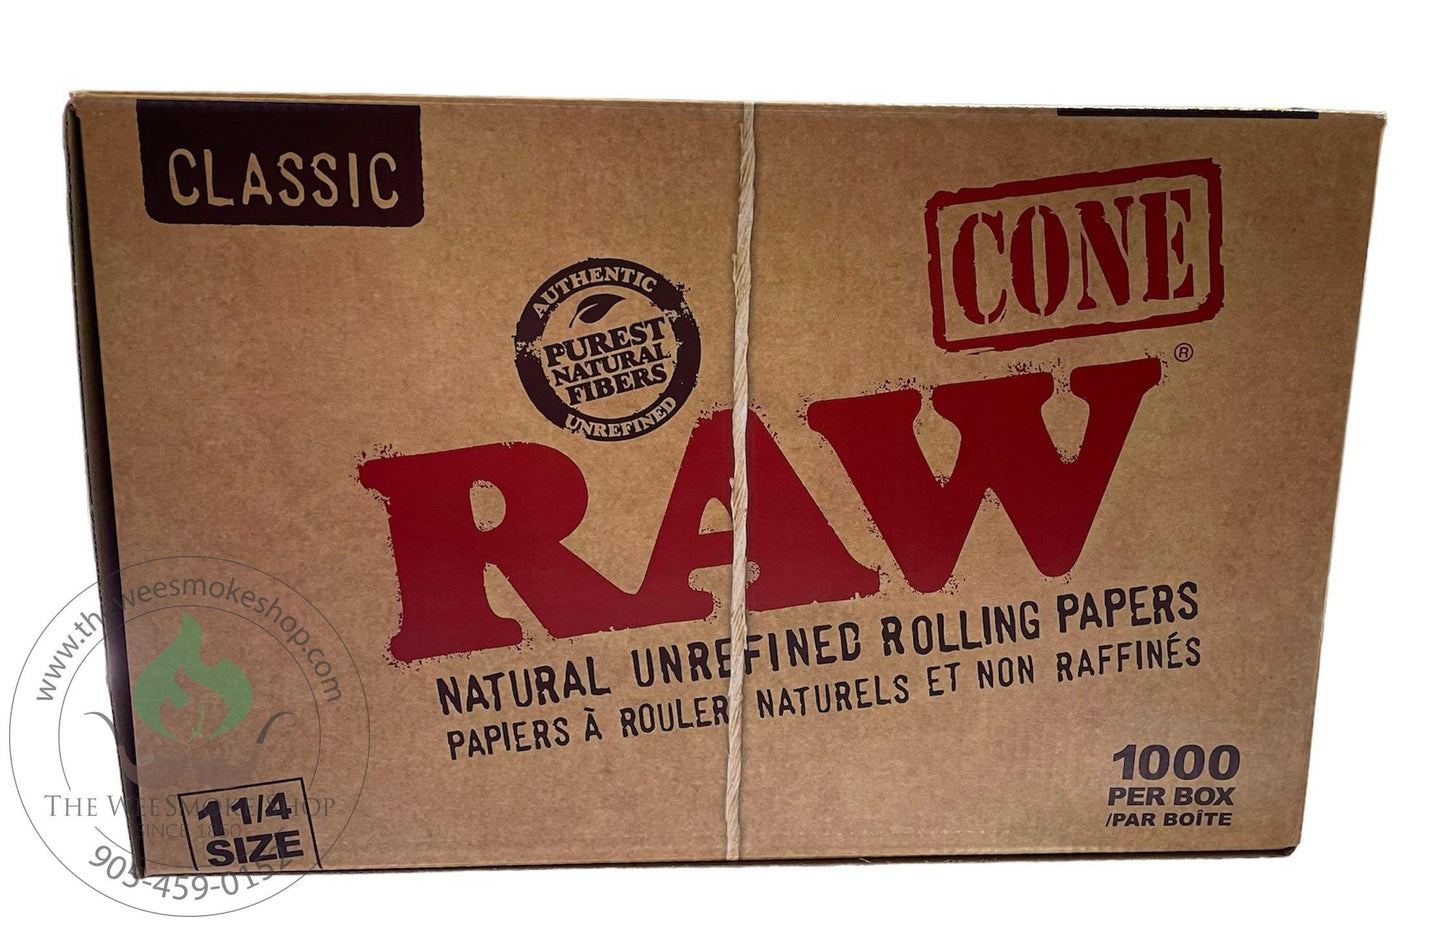 RAW Classic Cones: 1 1/4 (79 MM ) (6, 32, and 75 pack)